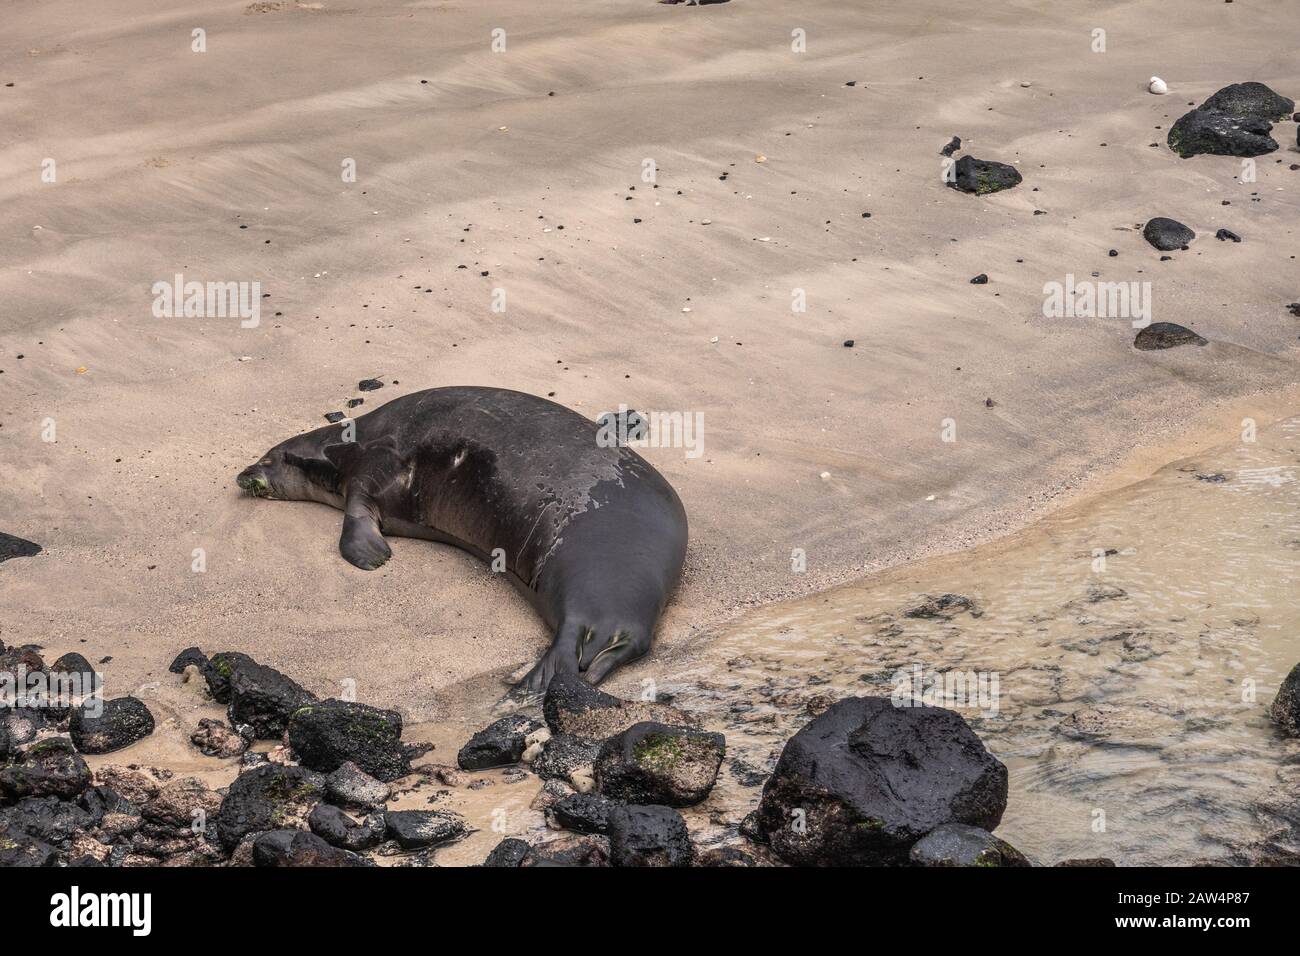 Kona, Hawaii, USA. - January 15, 2020: Black Hawaiian Monk Seal rests on small patch of yellow sand in Kailua bay, the harbor of the town. Black lava Stock Photo